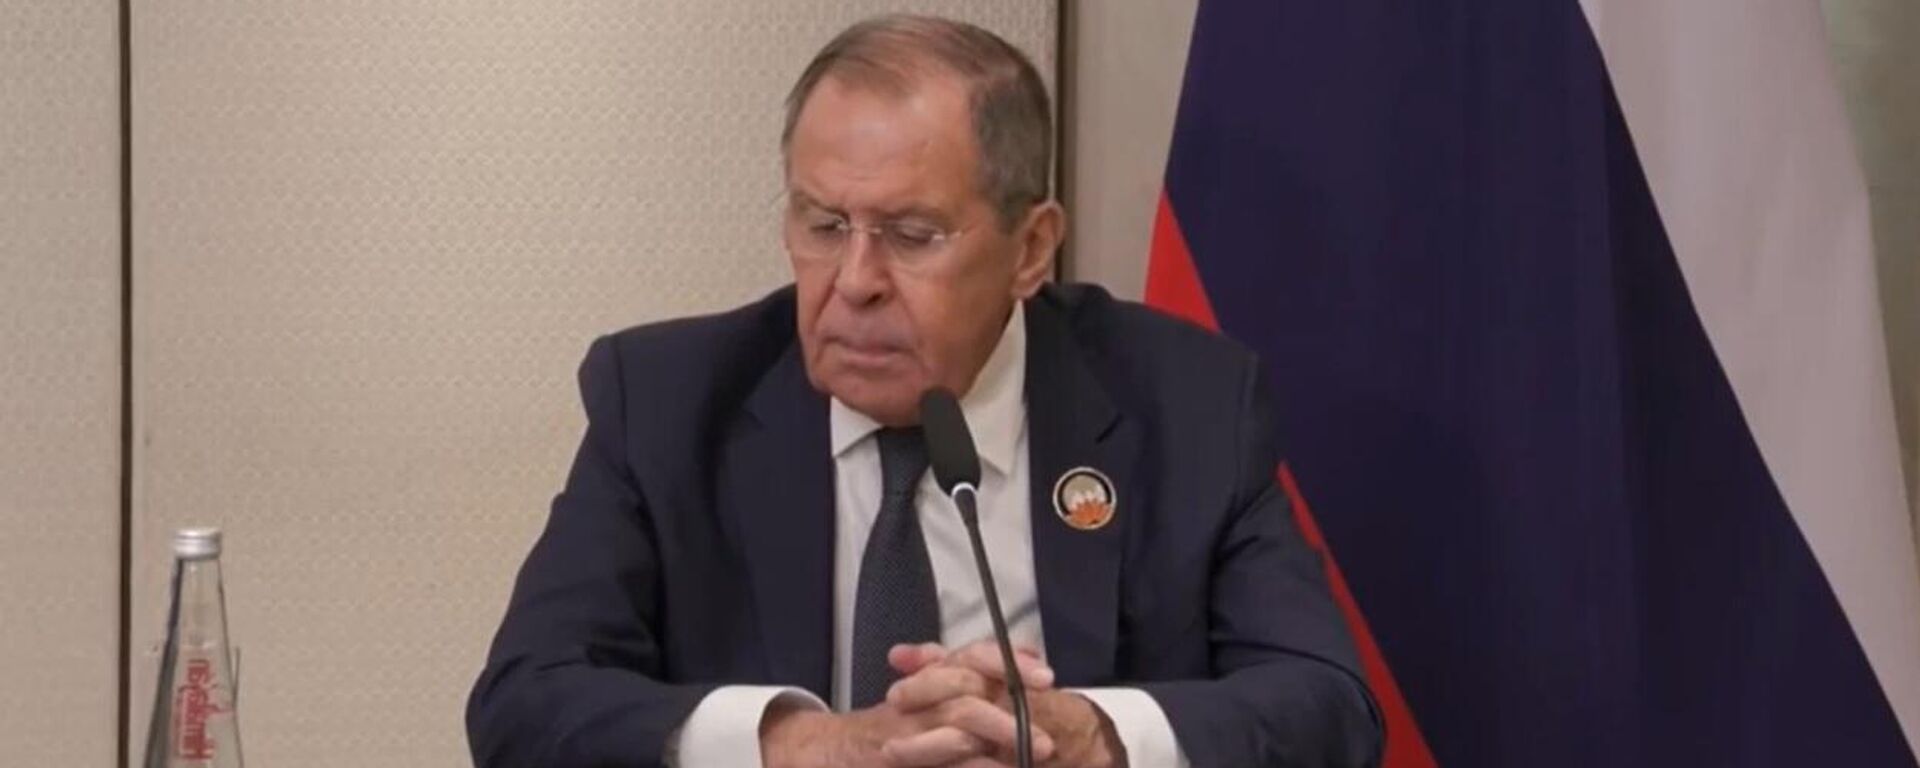 Sergey Lavrov to Sputnik: Everyone Understands What the Americans Want From Russia - Sputnik International, 1920, 10.09.2023